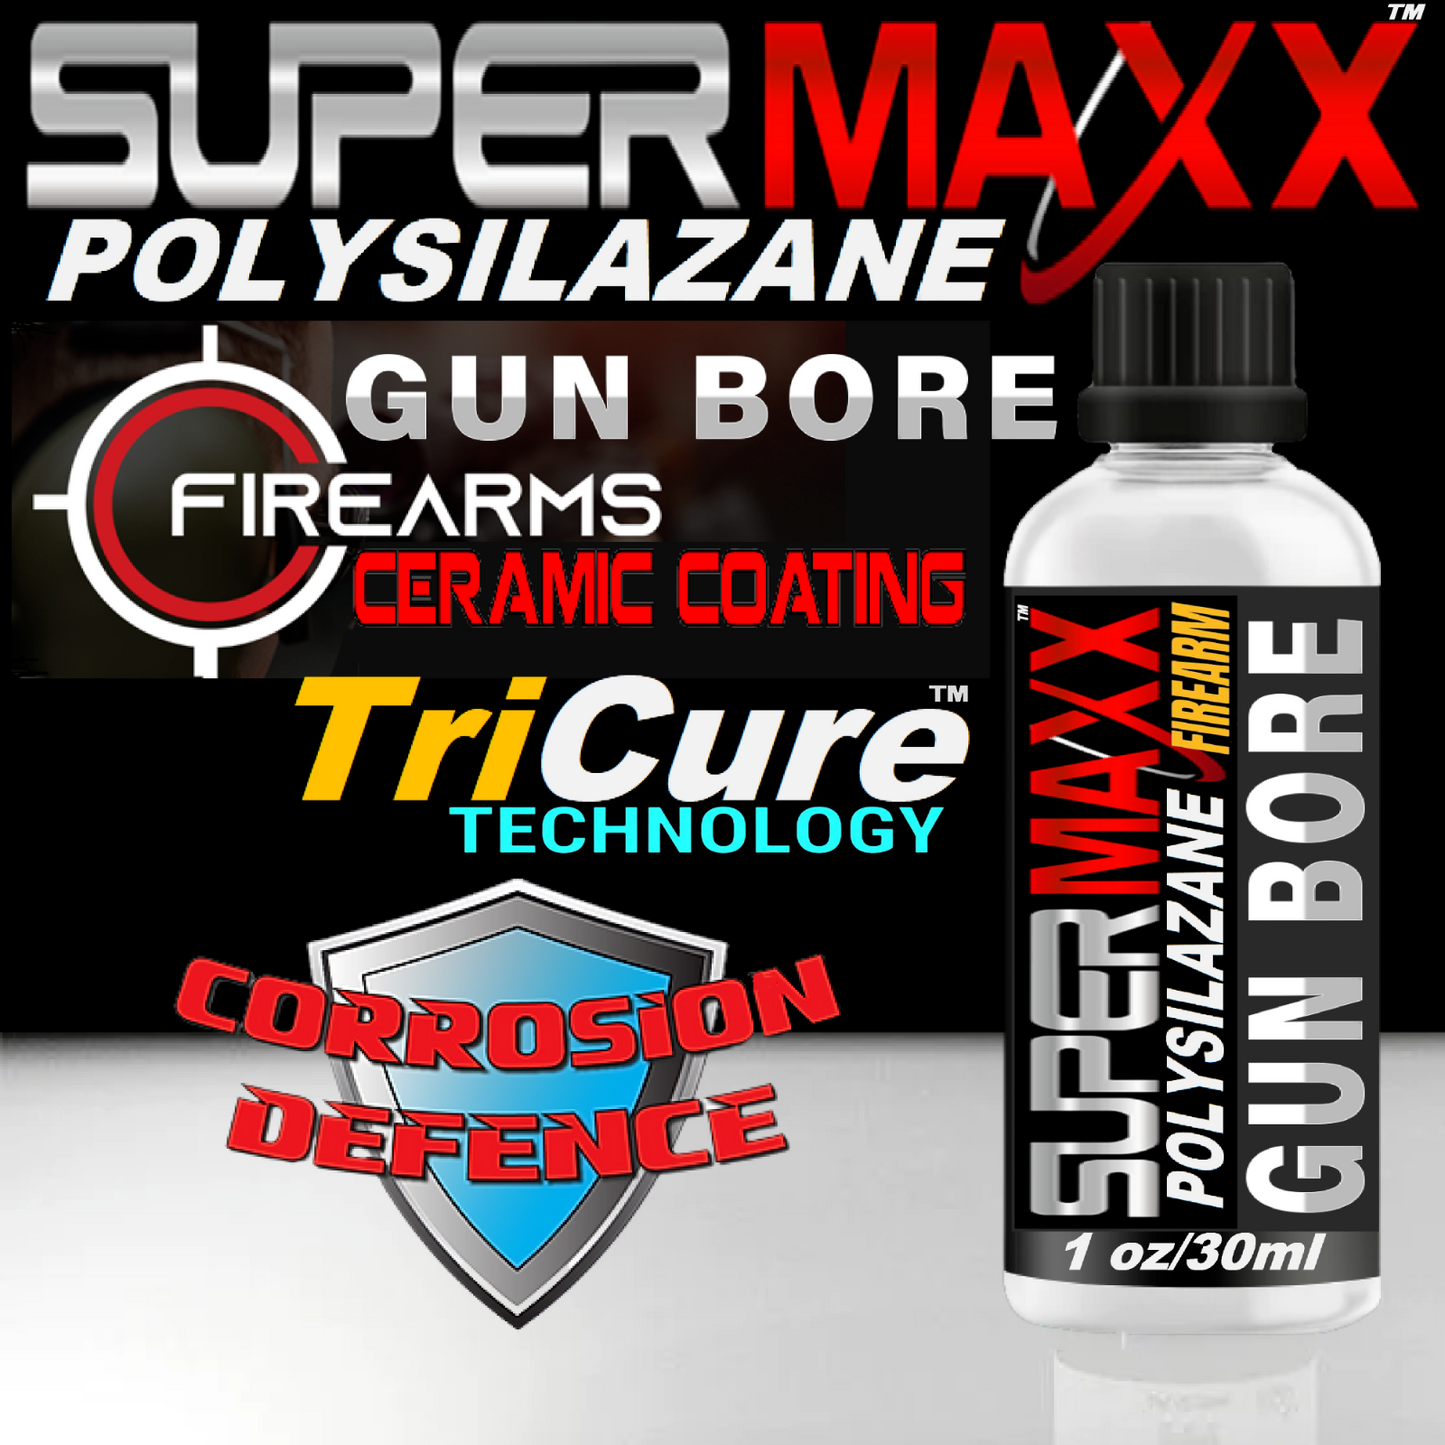 GUN BORE CERAMIC COATING WITH TRICURE TECHNOLOGY FIREARM PROTECTION